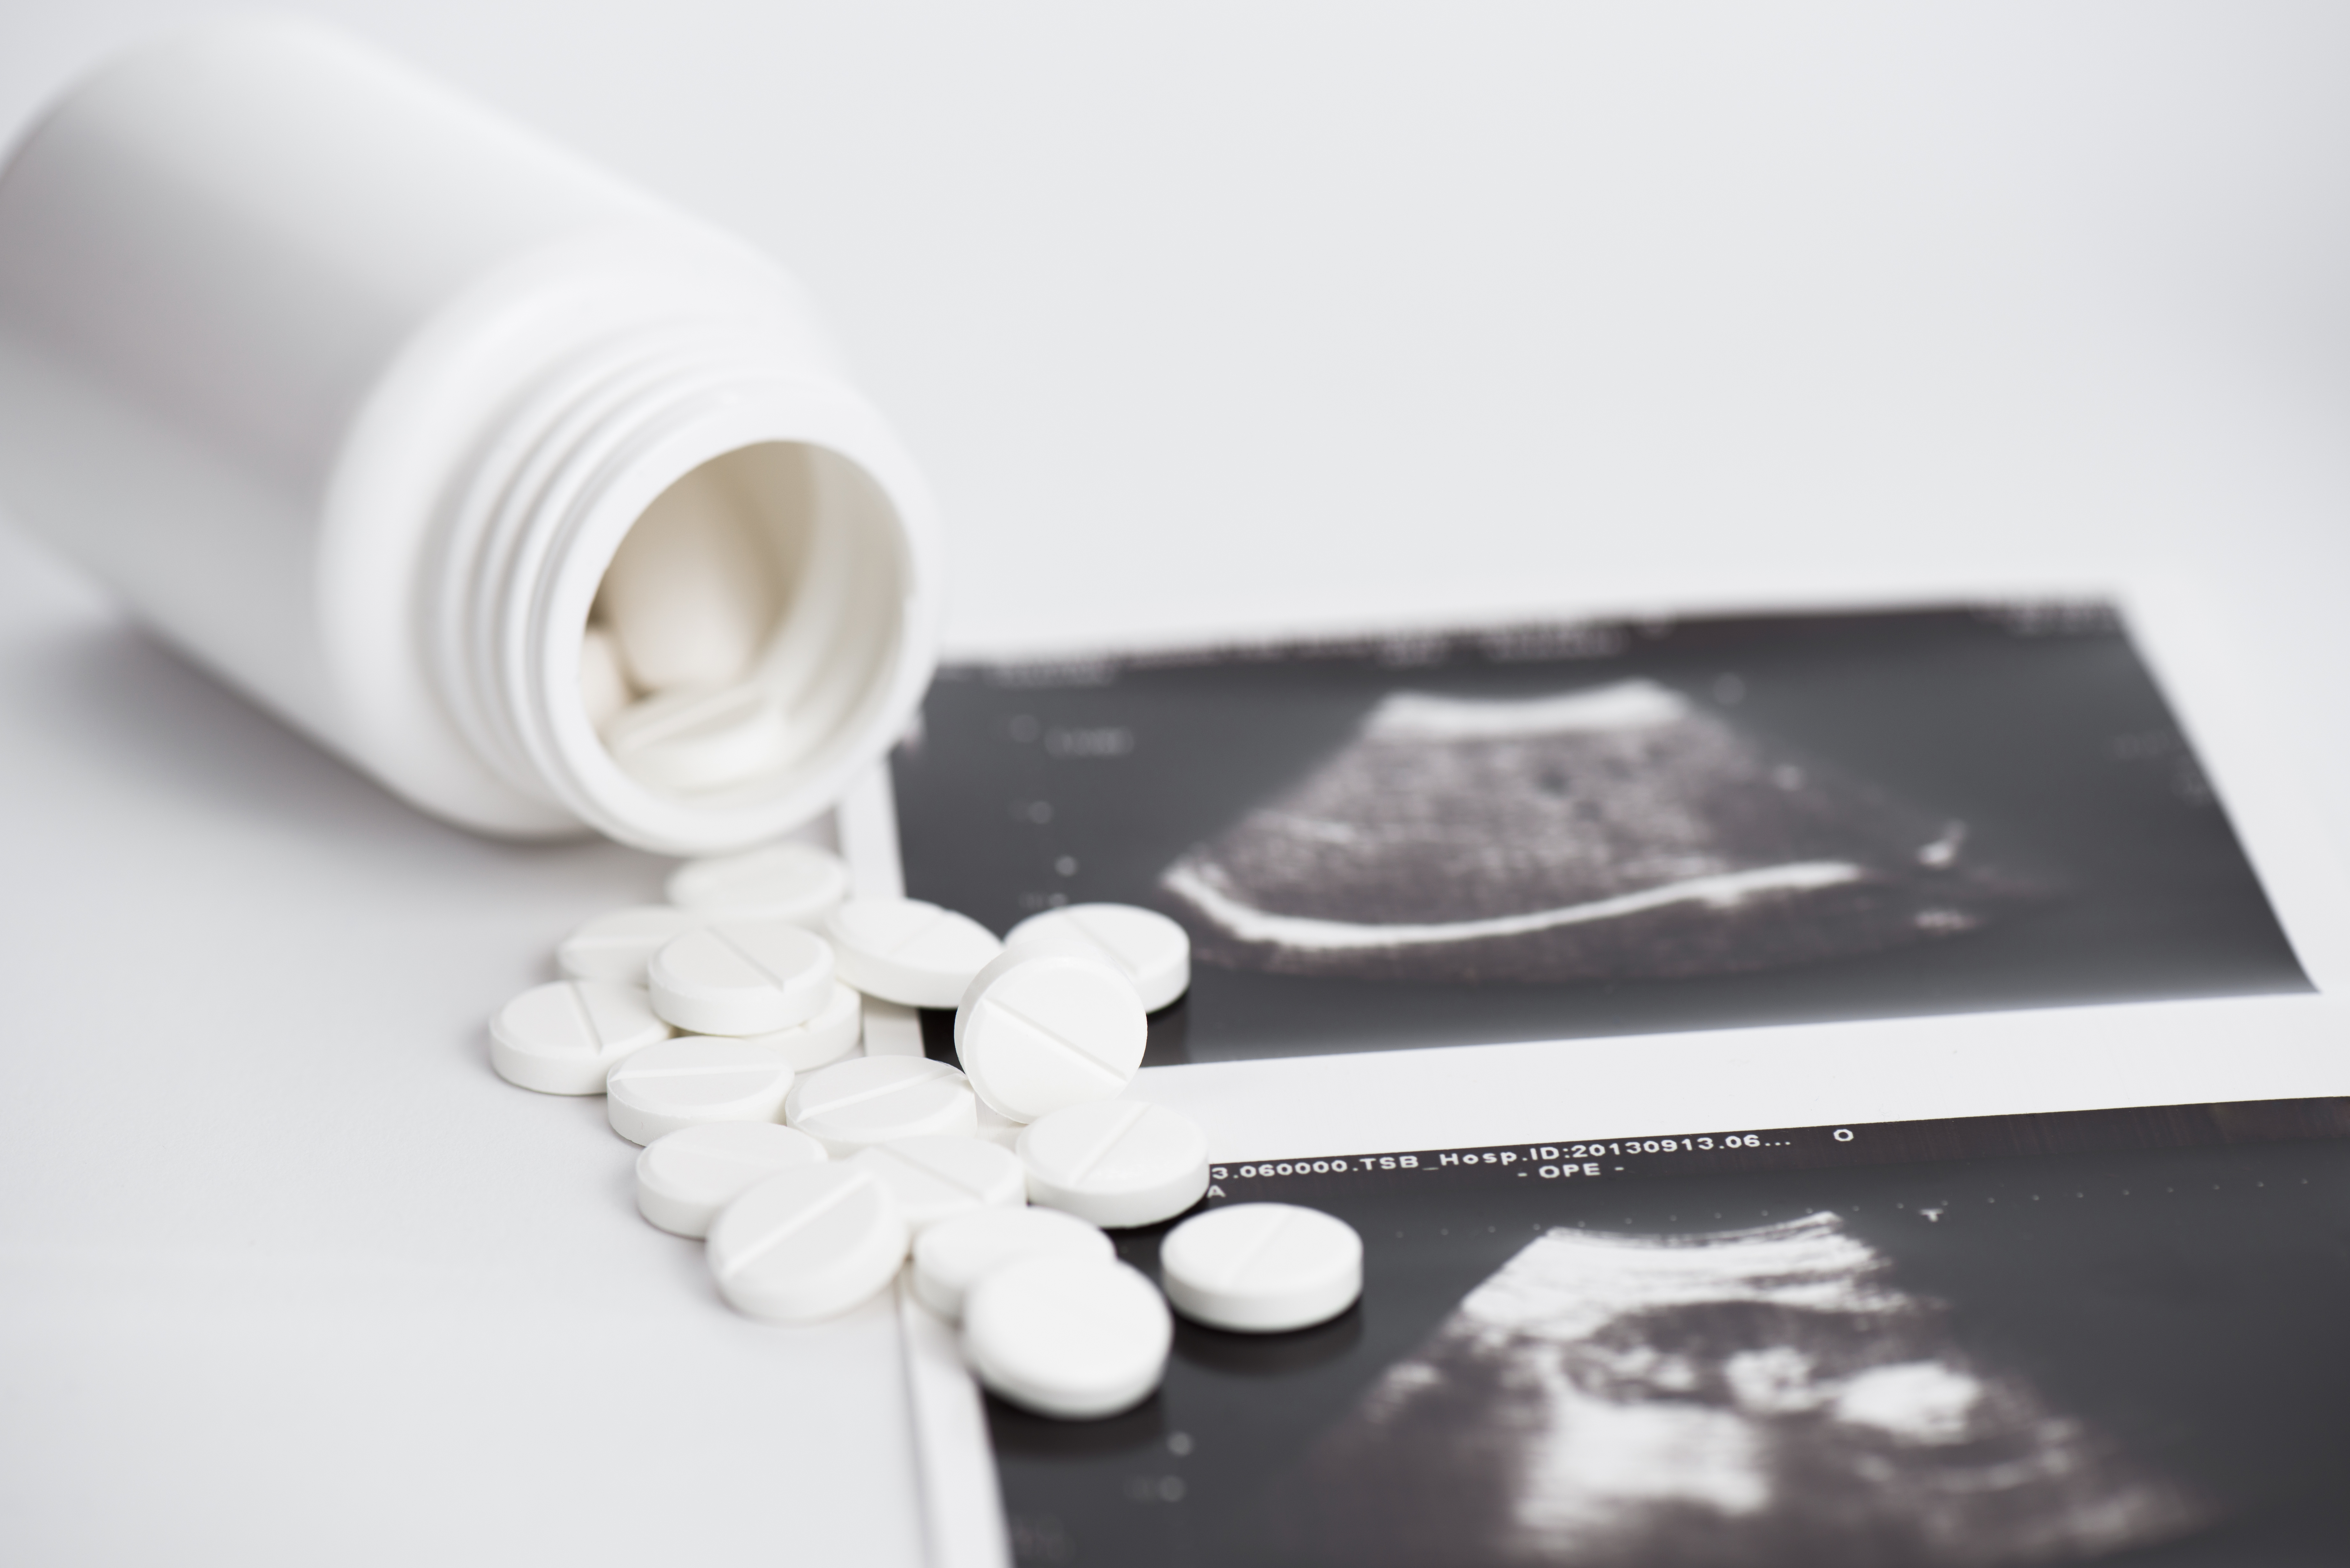 Penny Nance urges FDA to remove abortion pill from U.S. market